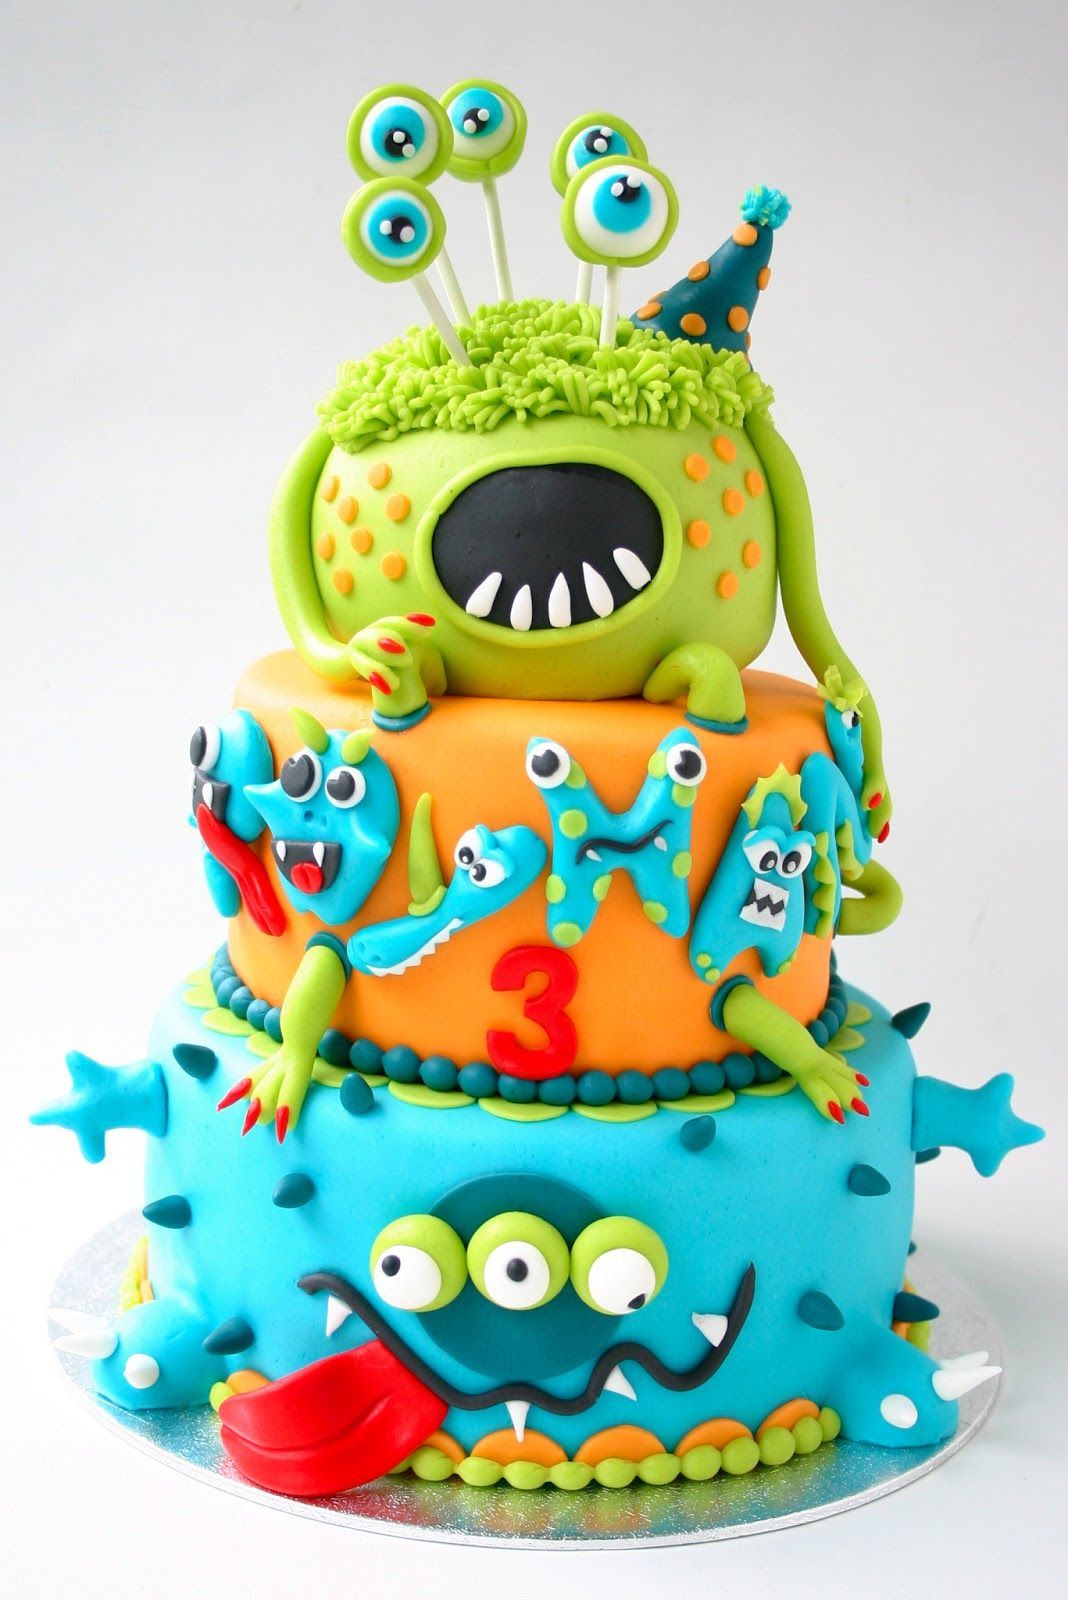 Awesome Monster Cake boys party birthday kids – Will have to remember this for a